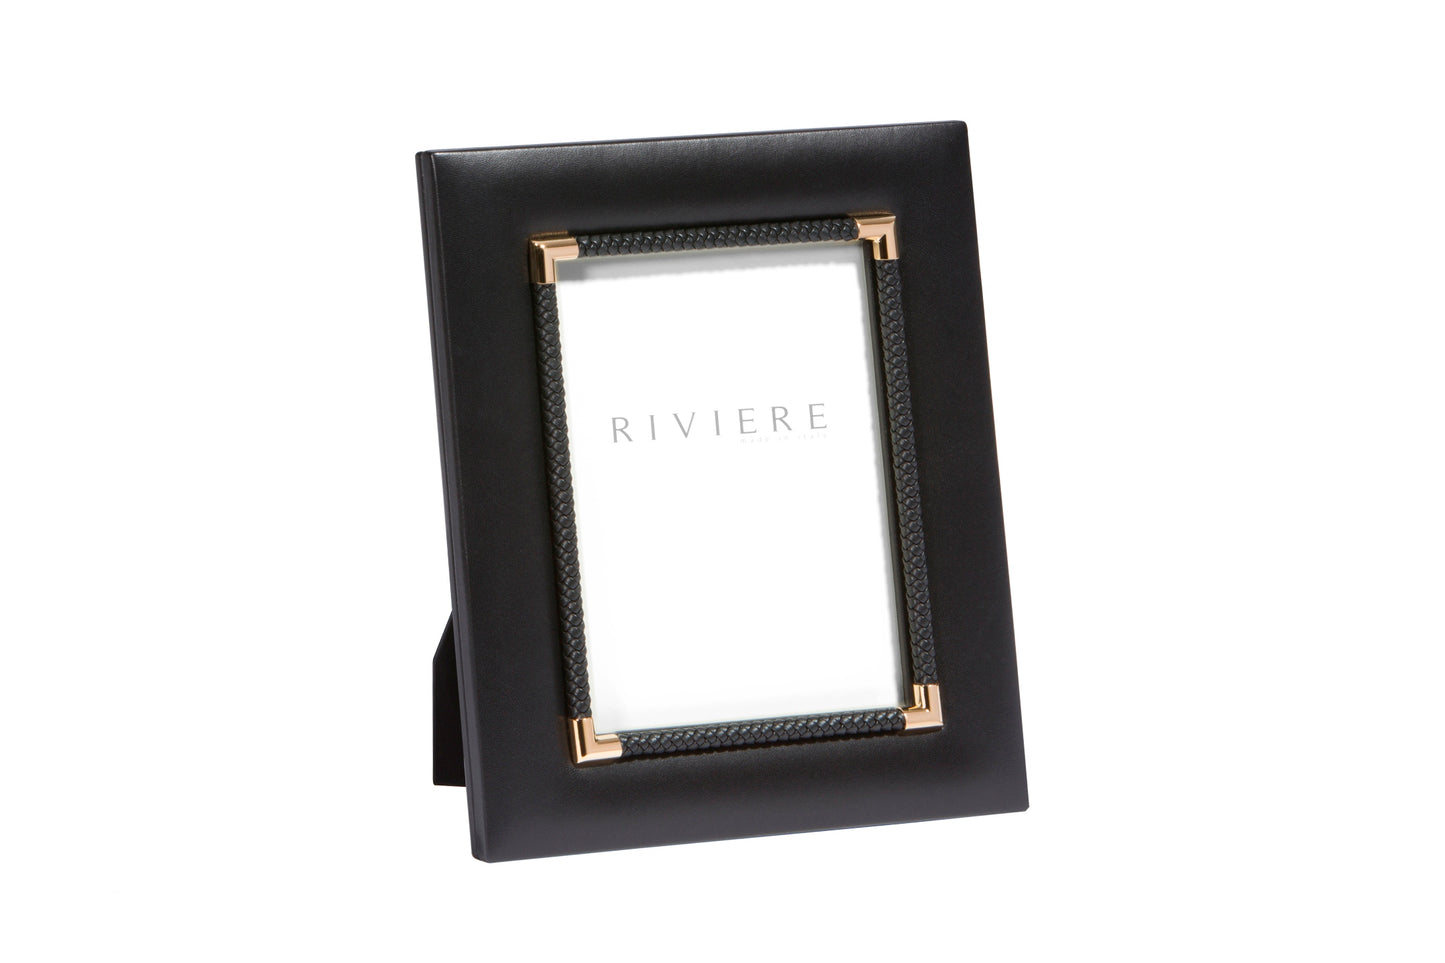 Riviere Thea #1 Leather Picture Frame With Metal Details | Luxurious Leather Frame Design | Inner Braided Trim for Added Detail | Chrome or Gold Metal Details for a Touch of Elegance | Explore a Range of Luxury Home Accessories at 2Jour Concierge, #1 luxury high-end gift & lifestyle shop